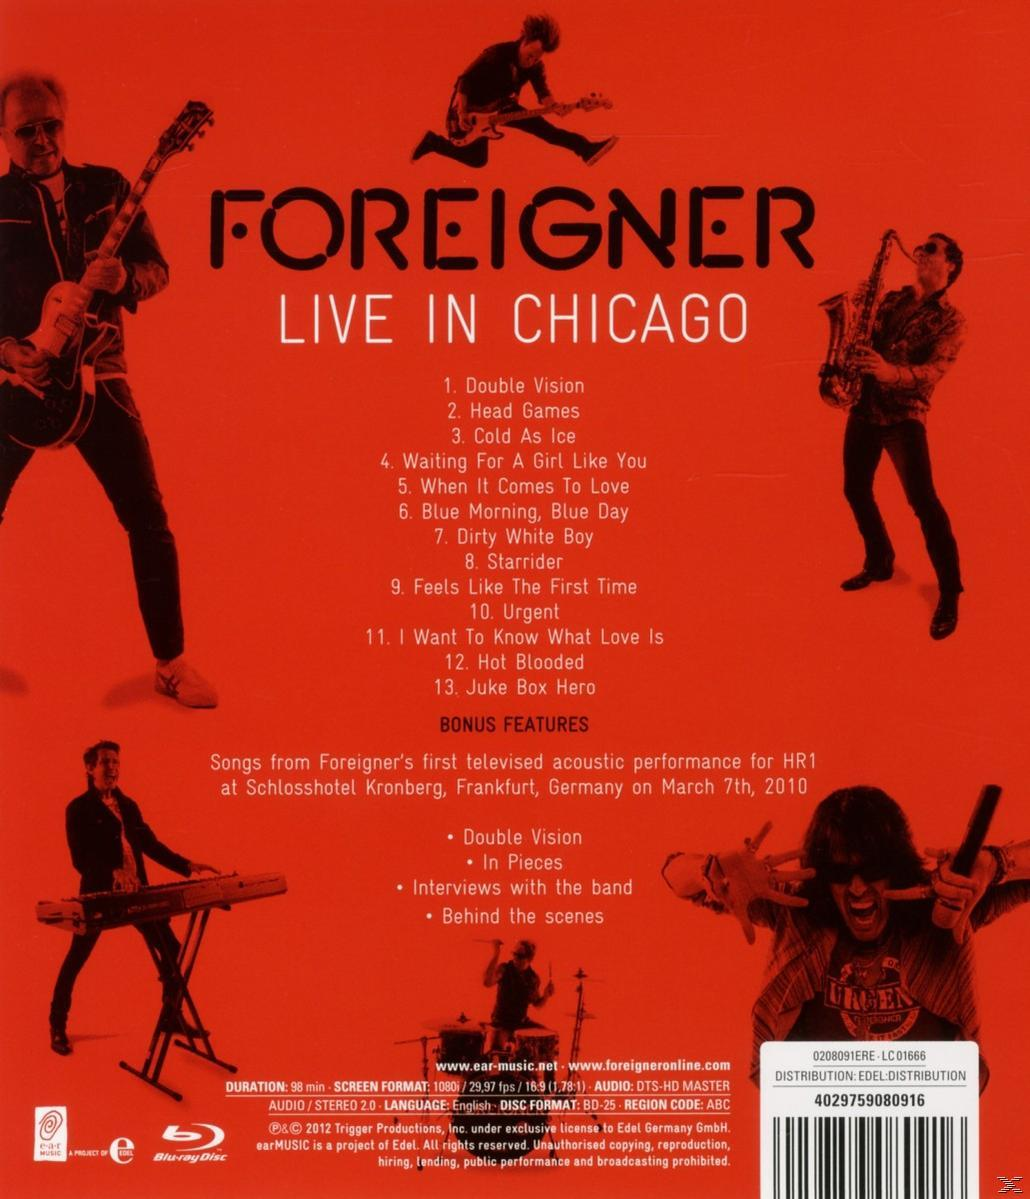 Chicago - - (Blu-ray) Live Foreigner In